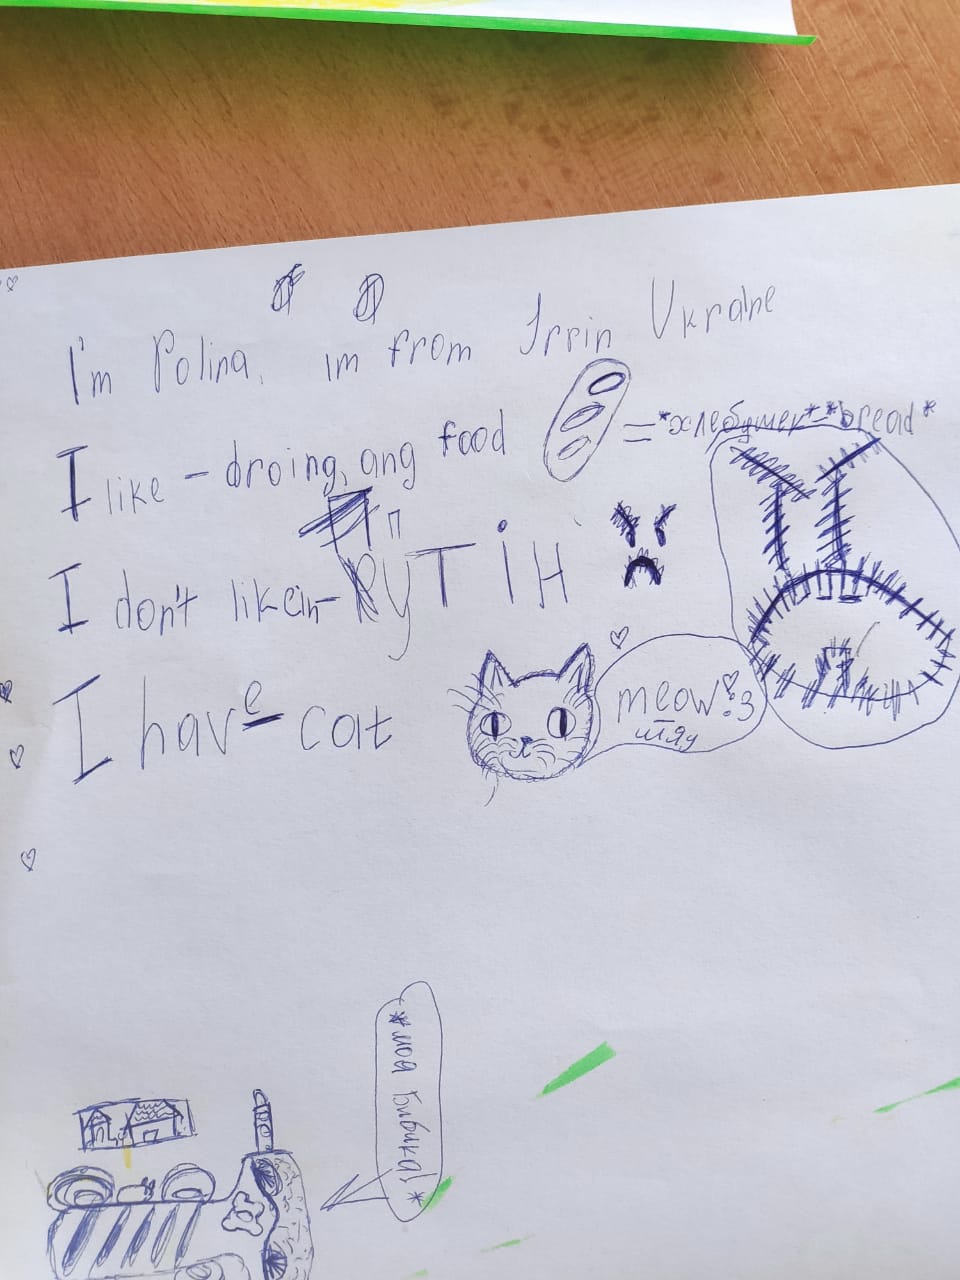 A student called Polina has written: "I like drawing and food. I don't like Putin. I have (a) cat."